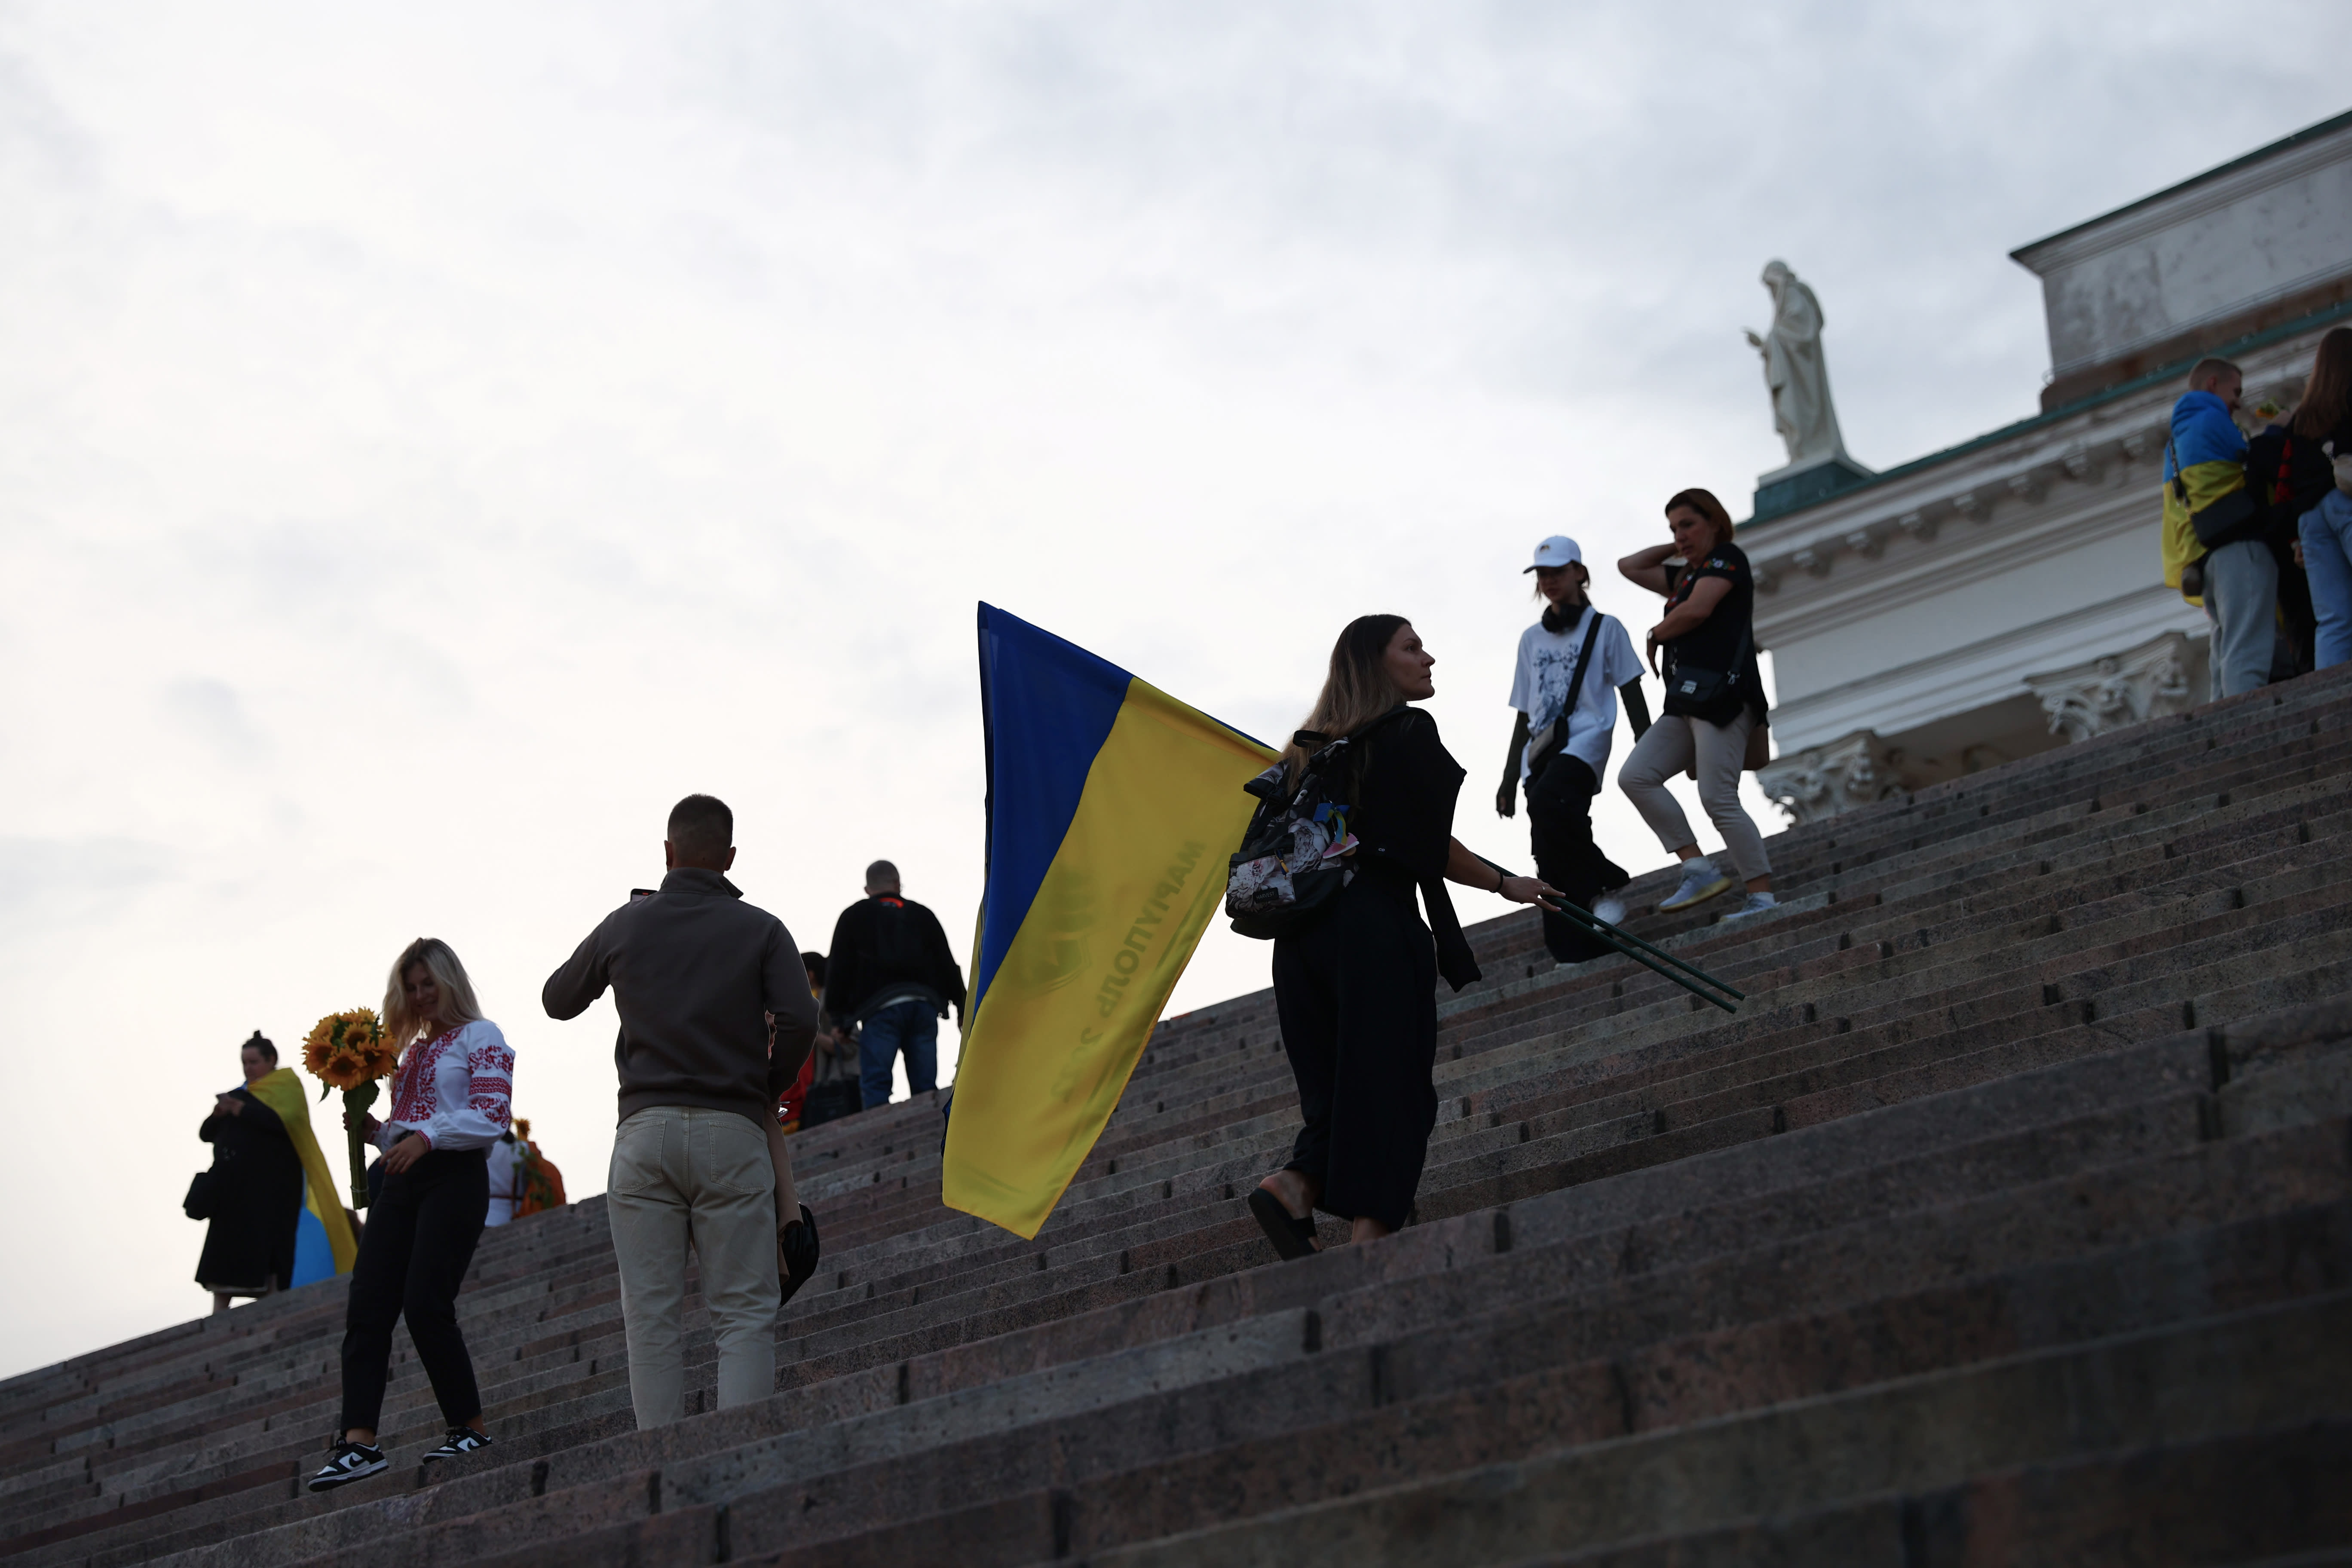 Finnish flags show solidarity with Ukraine